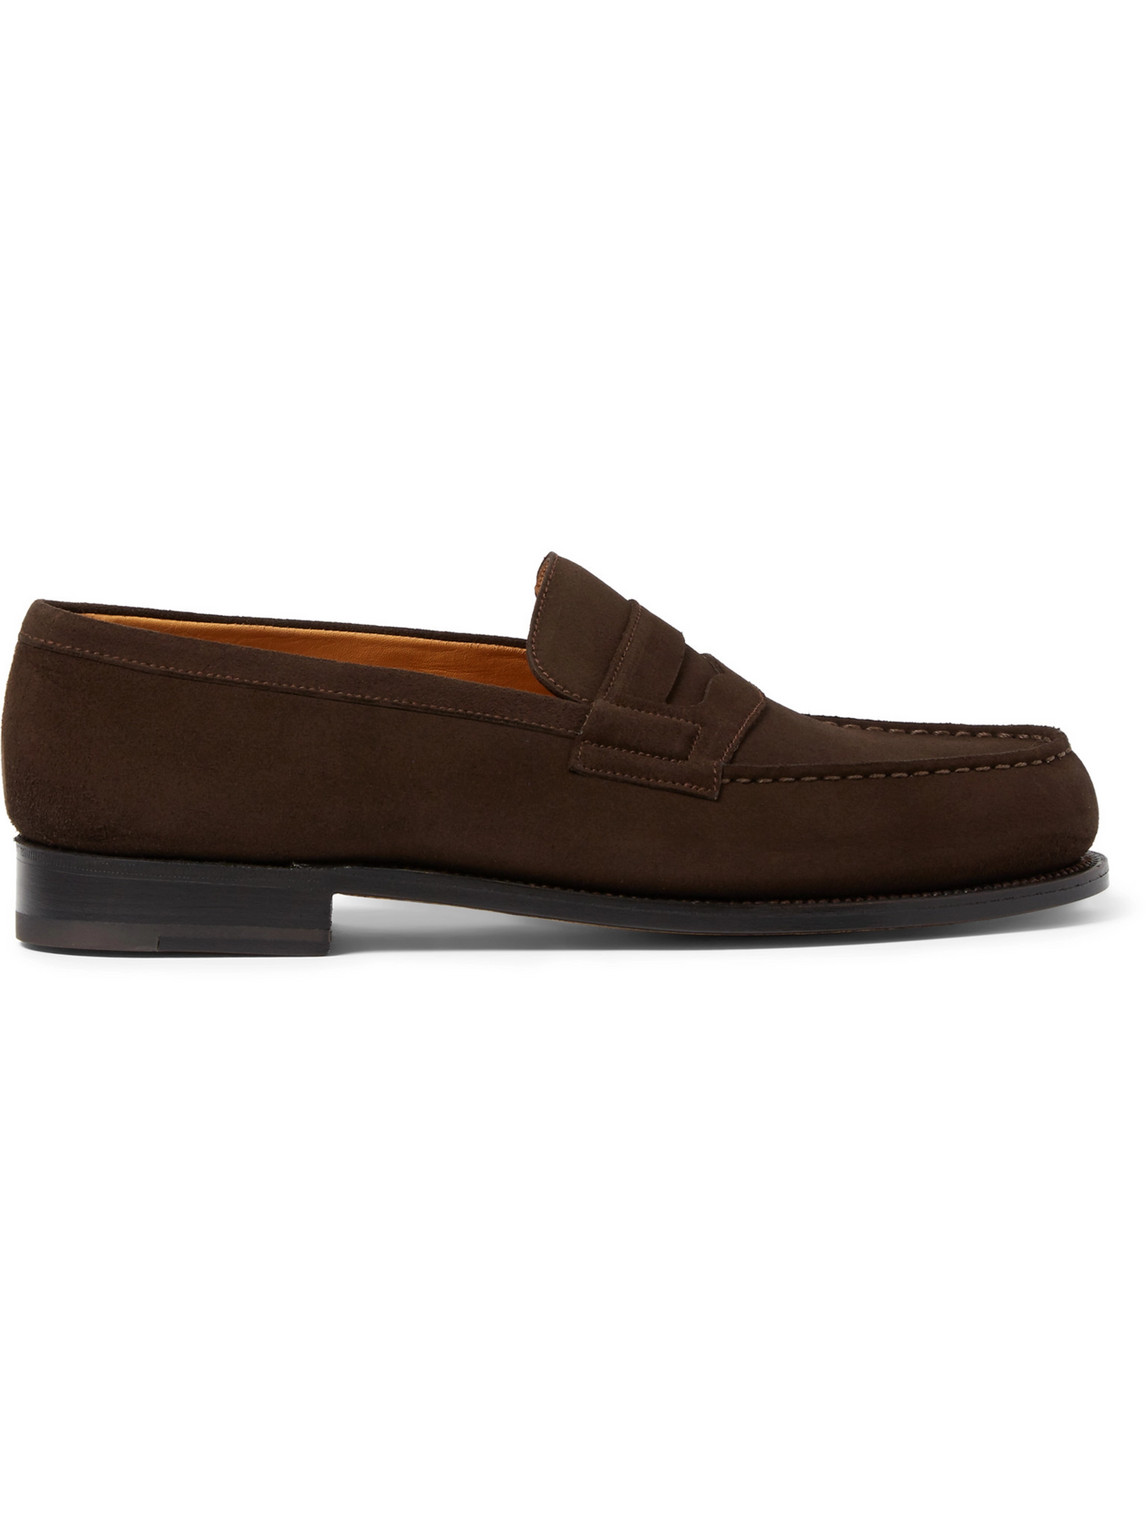 J.m. Weston 180 Moccasin Suede Loafers In Brown